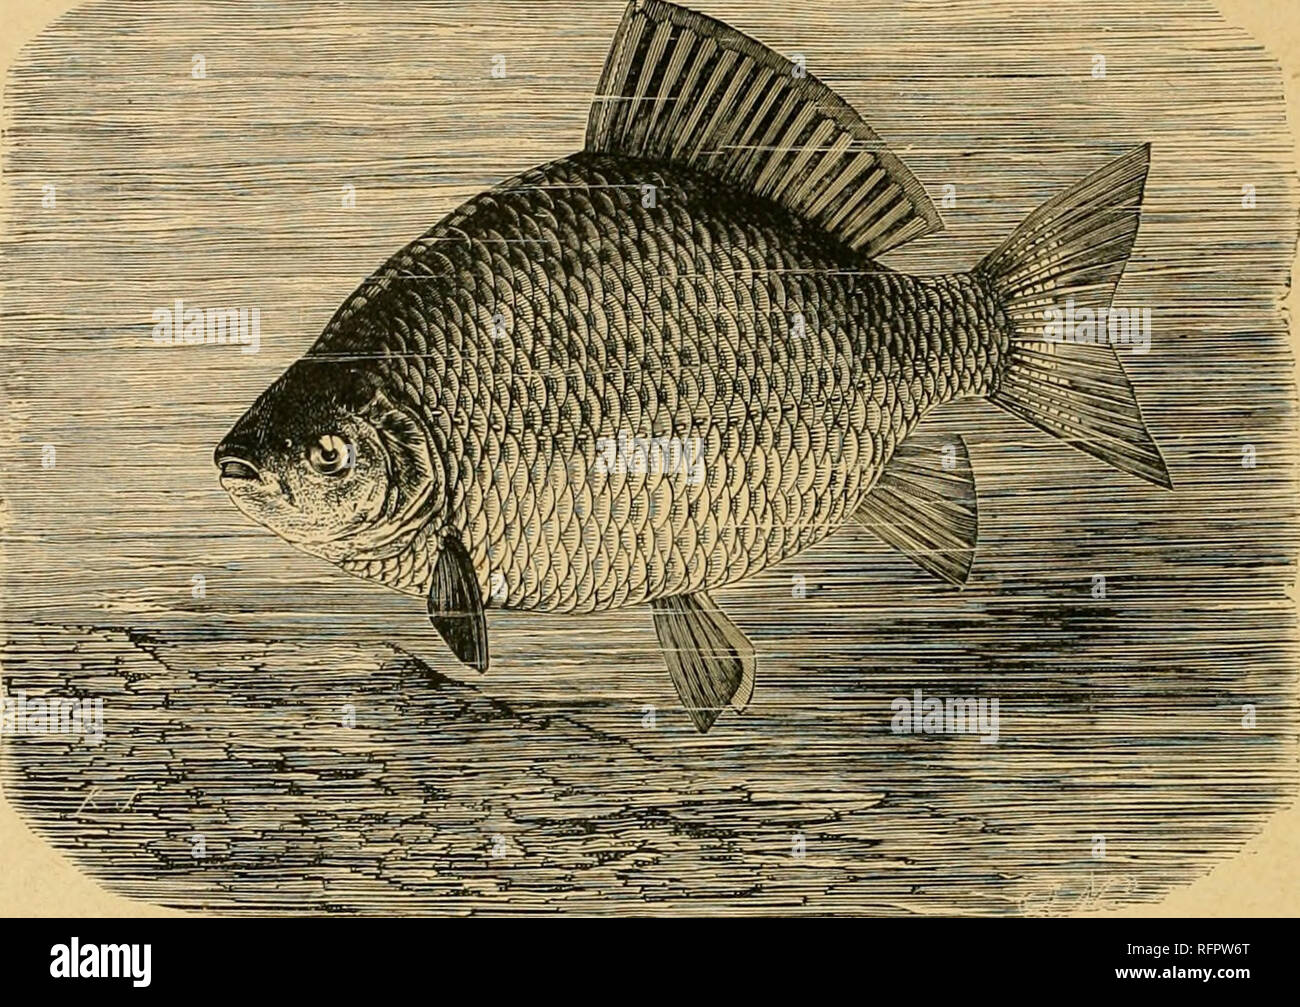 Cassell's natural history. Animals; Animal behavior. 126 NATURAL HIHTOJiT.  Formosa, and Java. It does well in brackish water, and attains a large size  in the Caspian Sea. The Carp is long-lived,